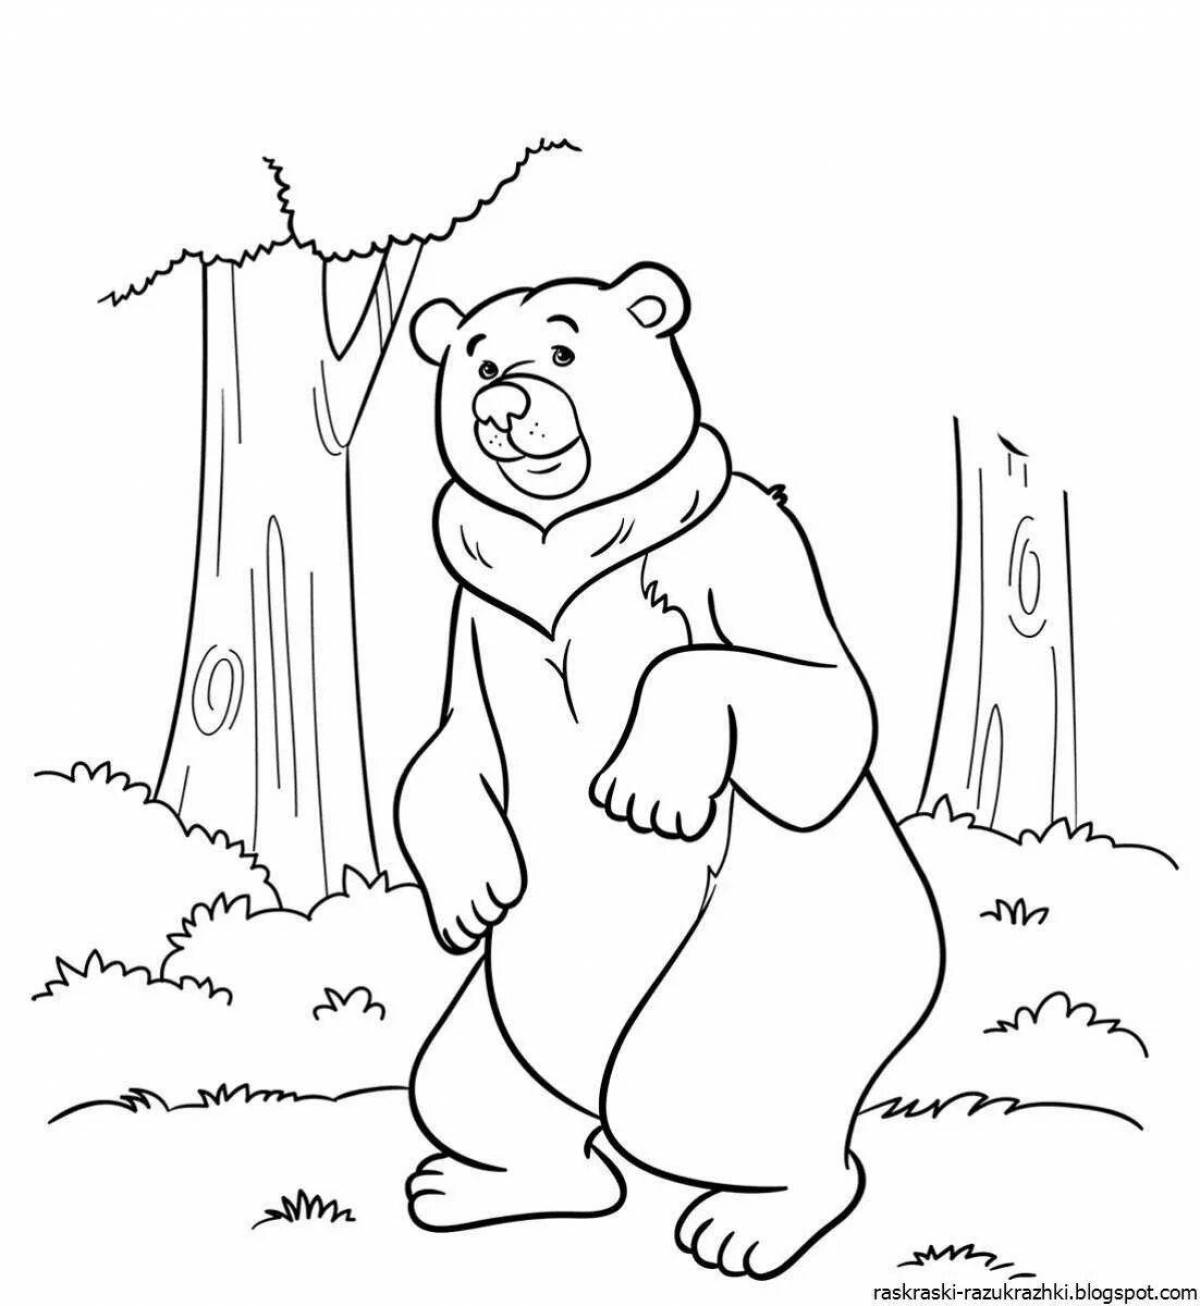 Impressive bear coloring book for children 5-6 years old